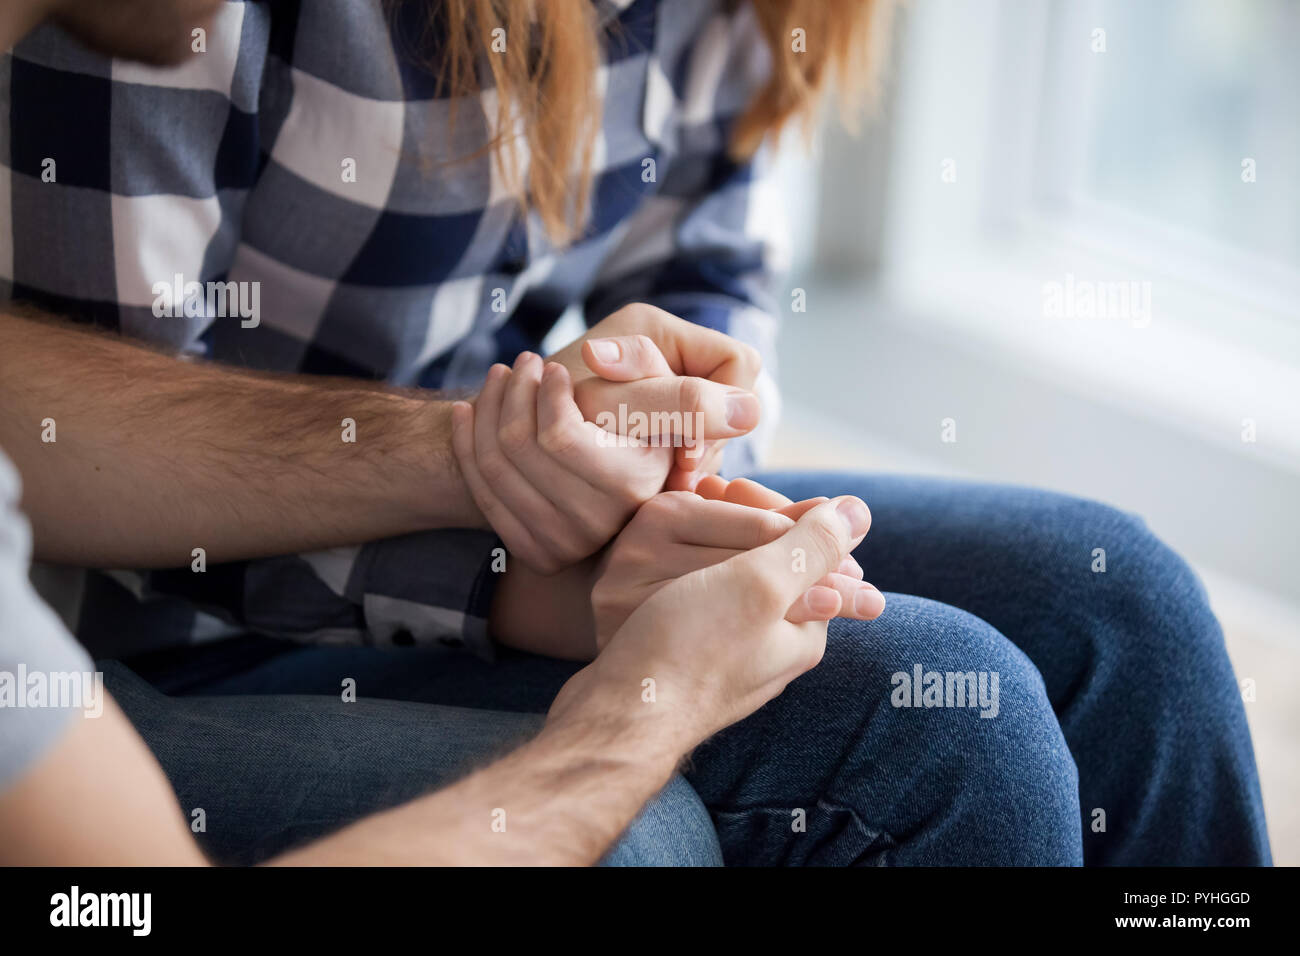 Couple holding hands, showing love and empathy close up Stock Photo